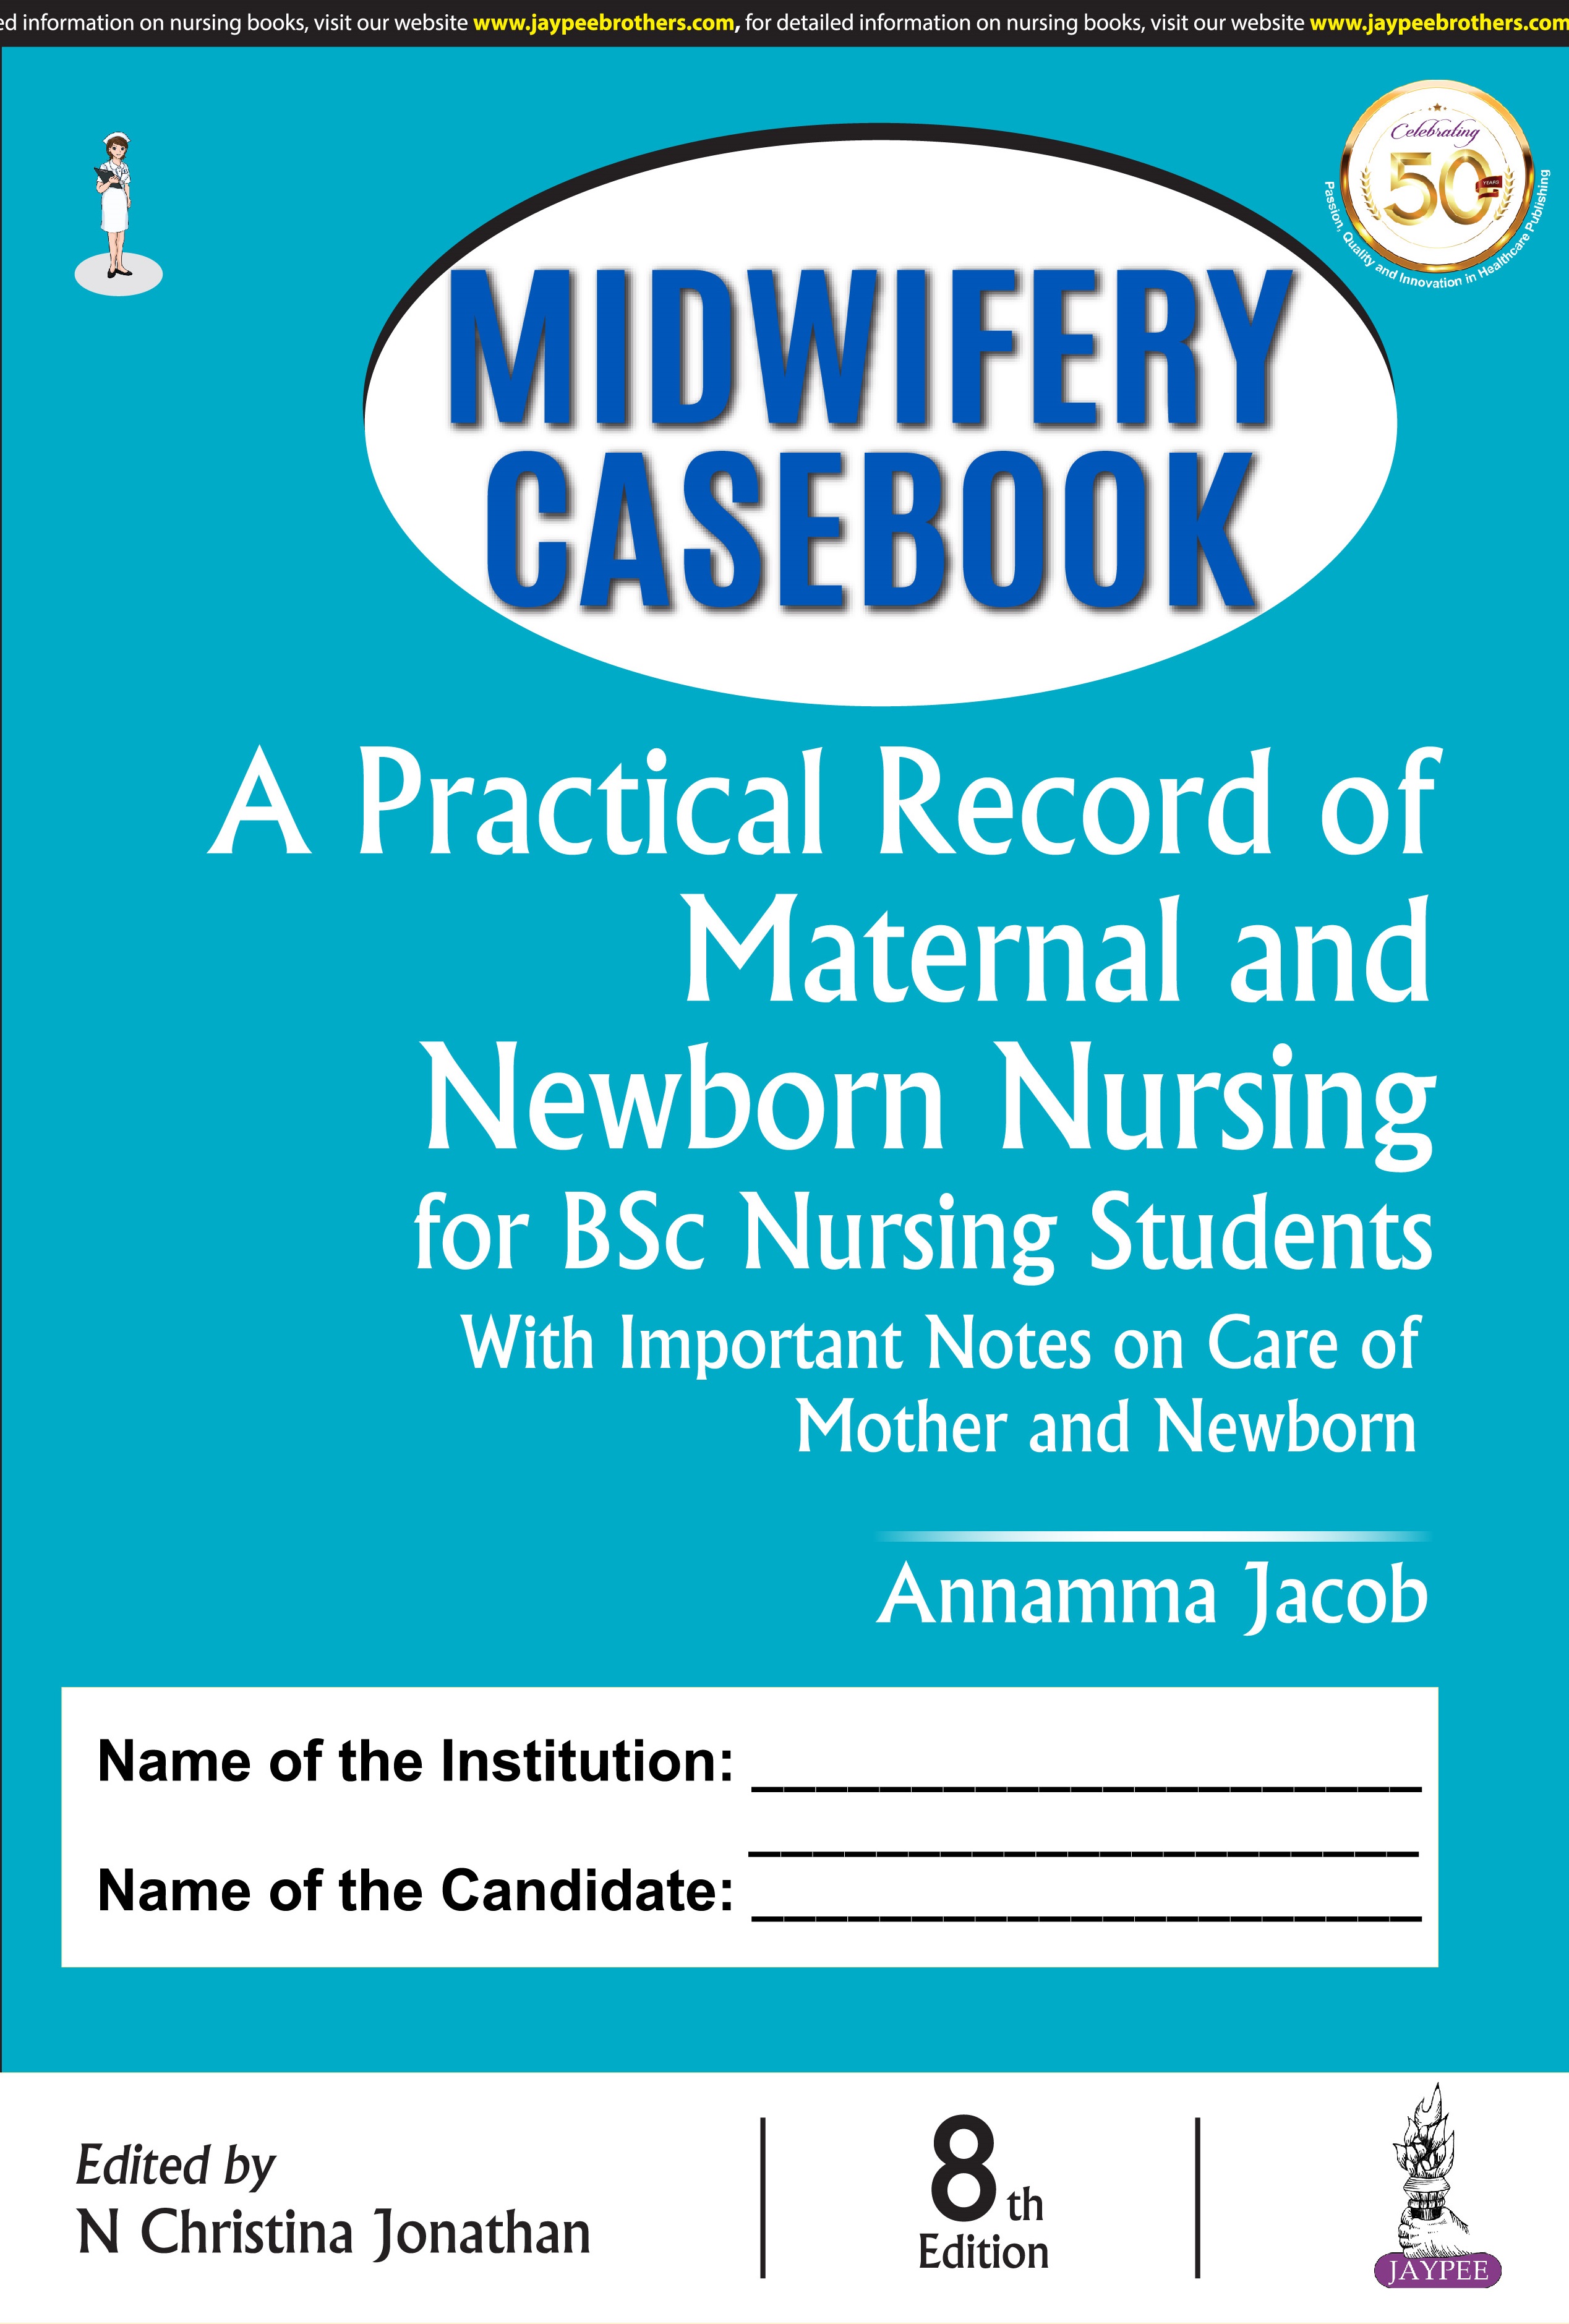 midwifery-casebook-a-practical-record-of-maternal-and-newborn-nursing-for-bsc-nursing-students